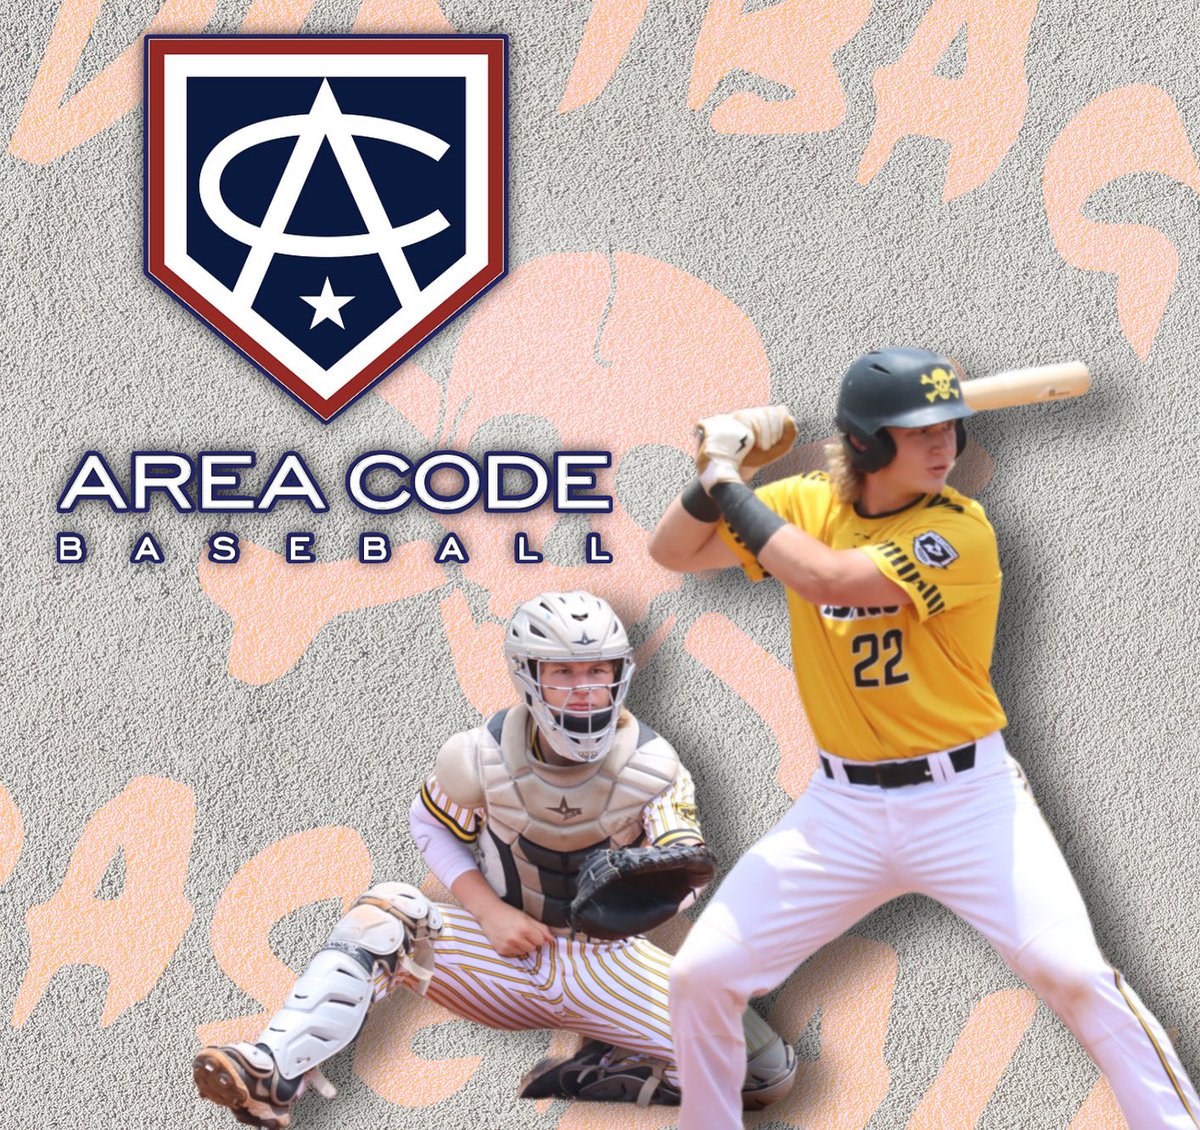 Big time congrats to 2025 @alsobrooks22 (Chris Alsobrooks) on his invite to the 2024 @ACBaseballGames tryouts! ☠️ ➖➖➖➖➖➖➖➖➖➖➖➖➖ #dirtbag🆙 #bagsarehot #areacode